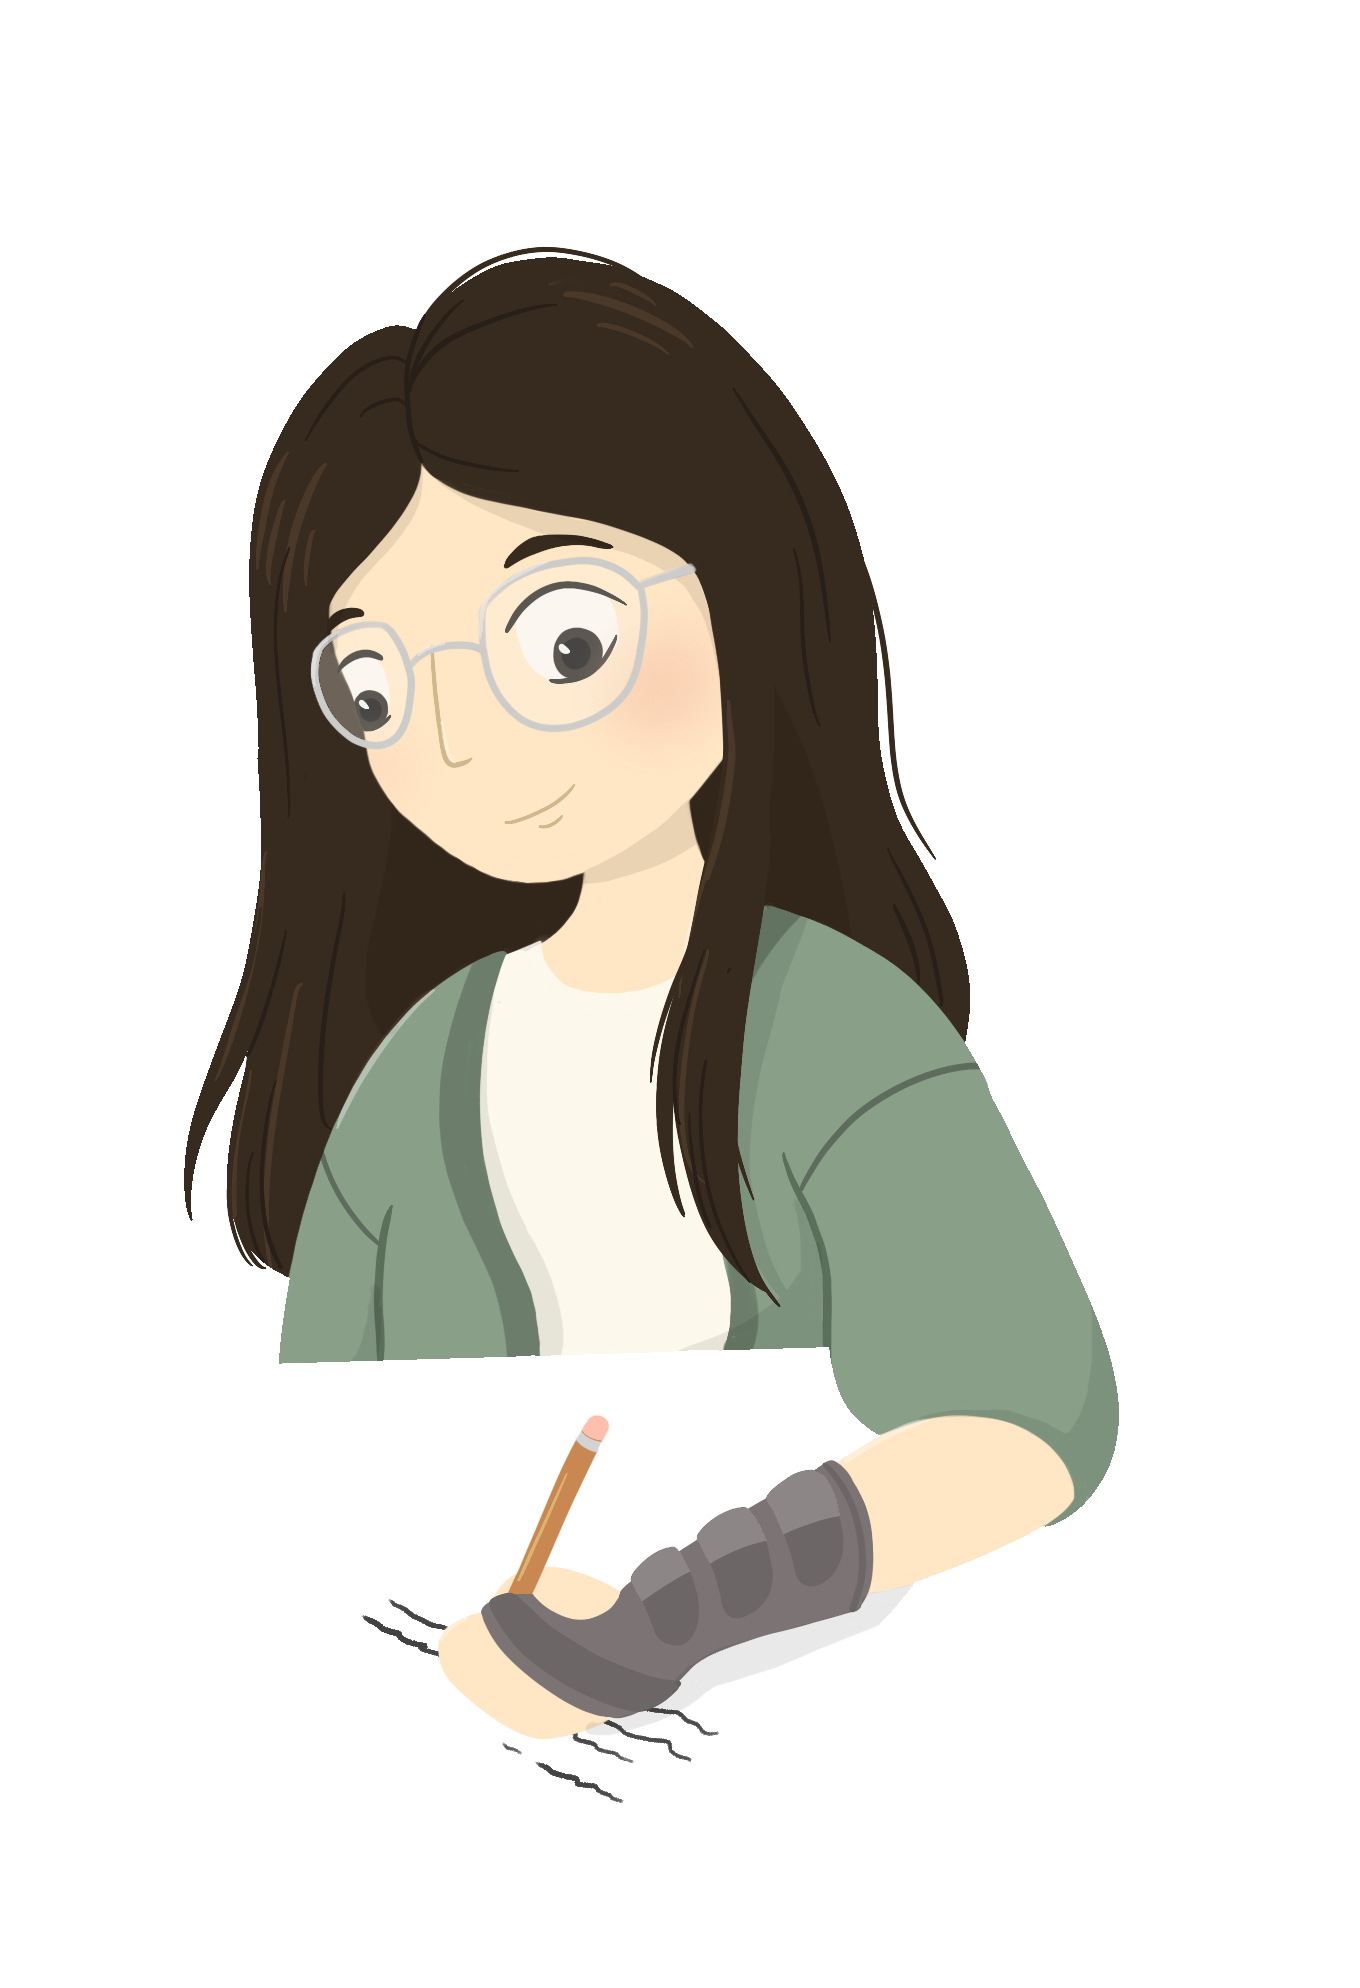 A girl with long black hair is sitting at a wooden desk writing on a piece of paper with a pencil. She is wearing a wrist-brace on her wrist while writing.